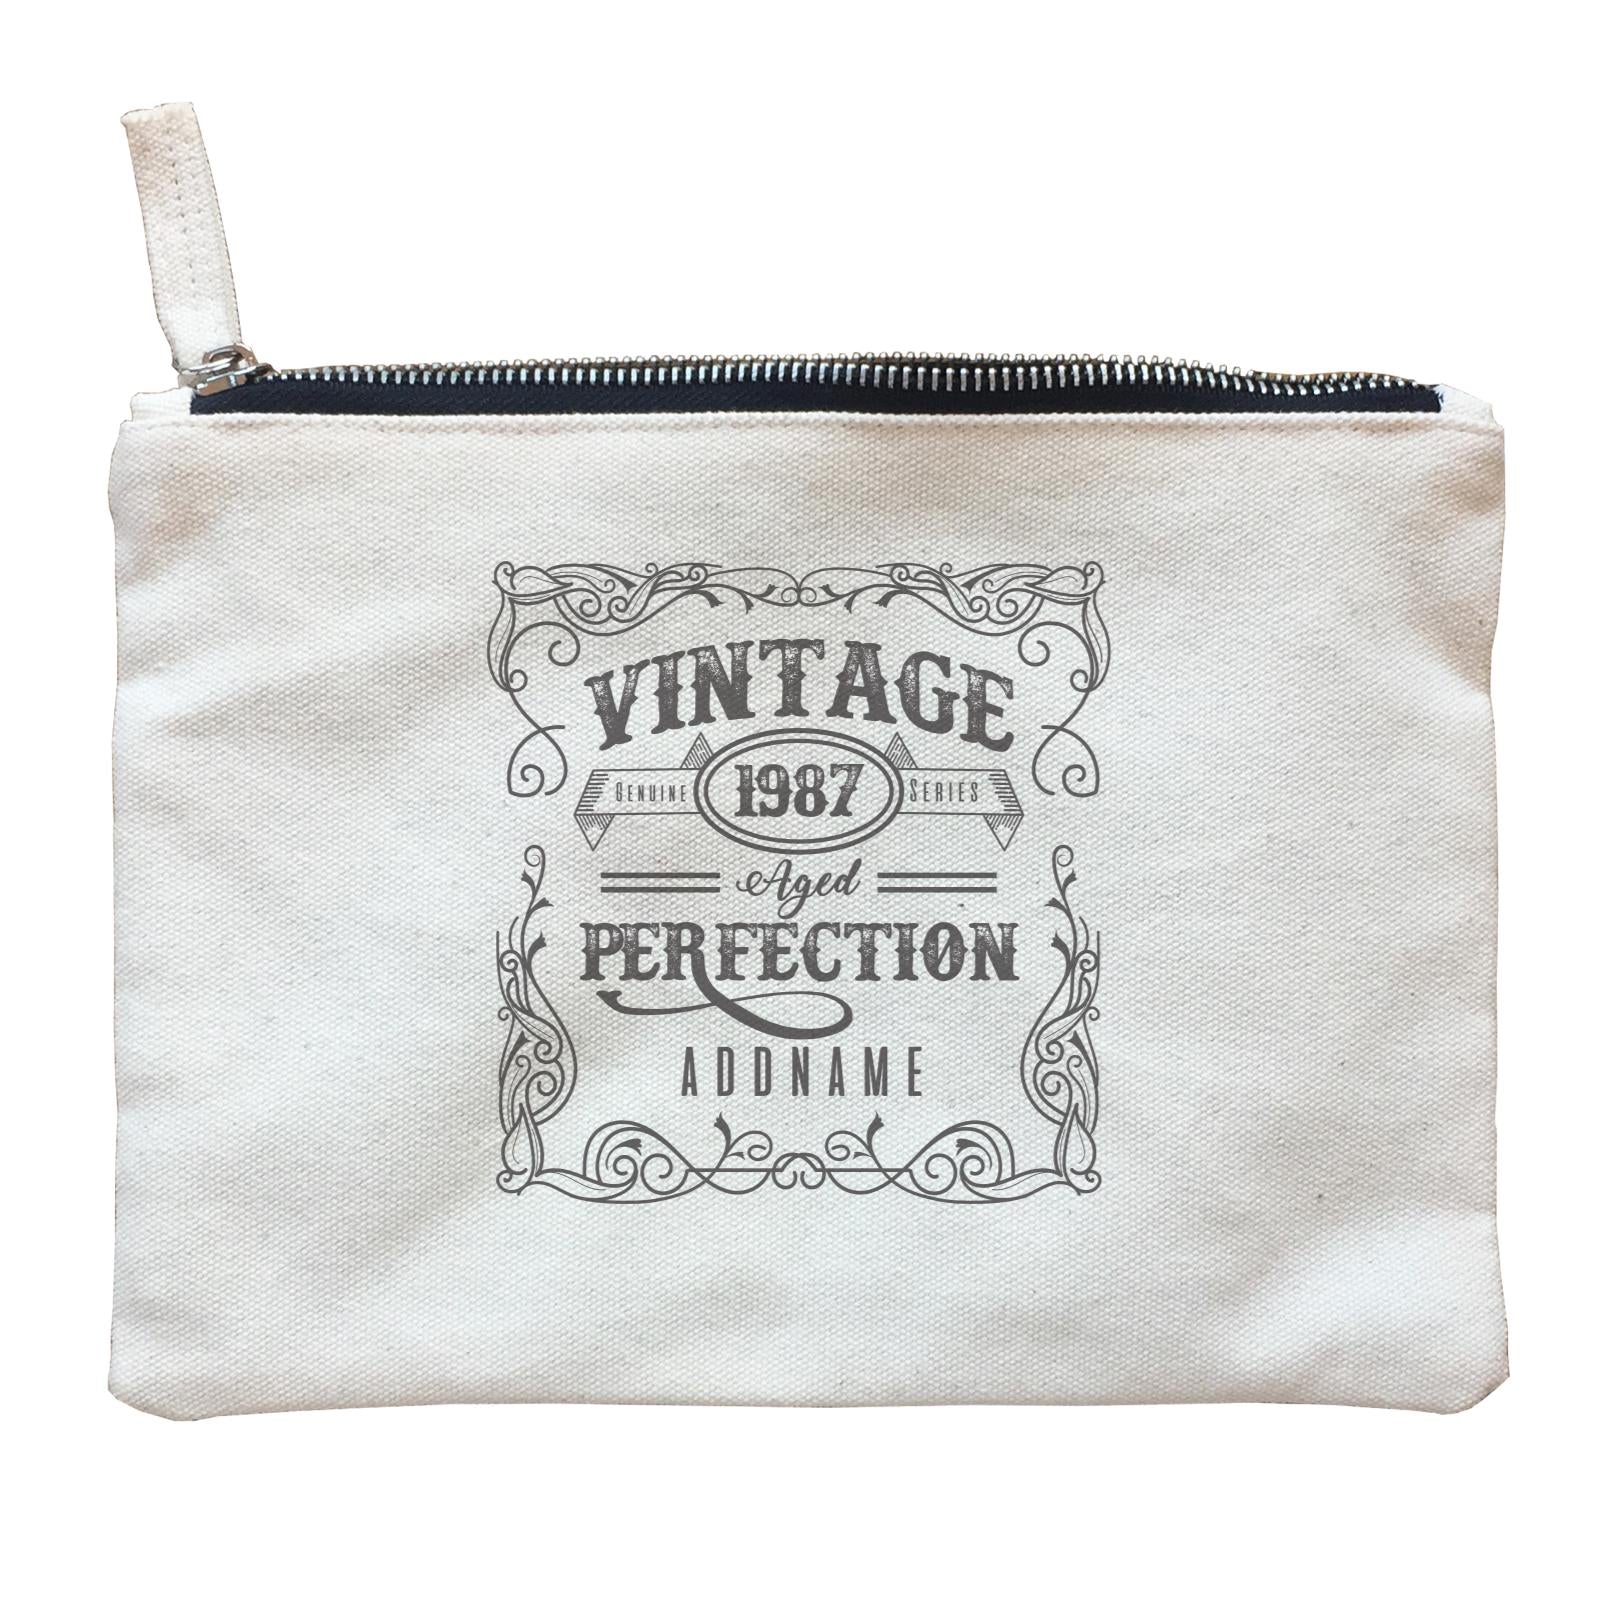 Personalize It Birthyear Vintage Aged Perfection with Addname and Add Year Zipper Pouch